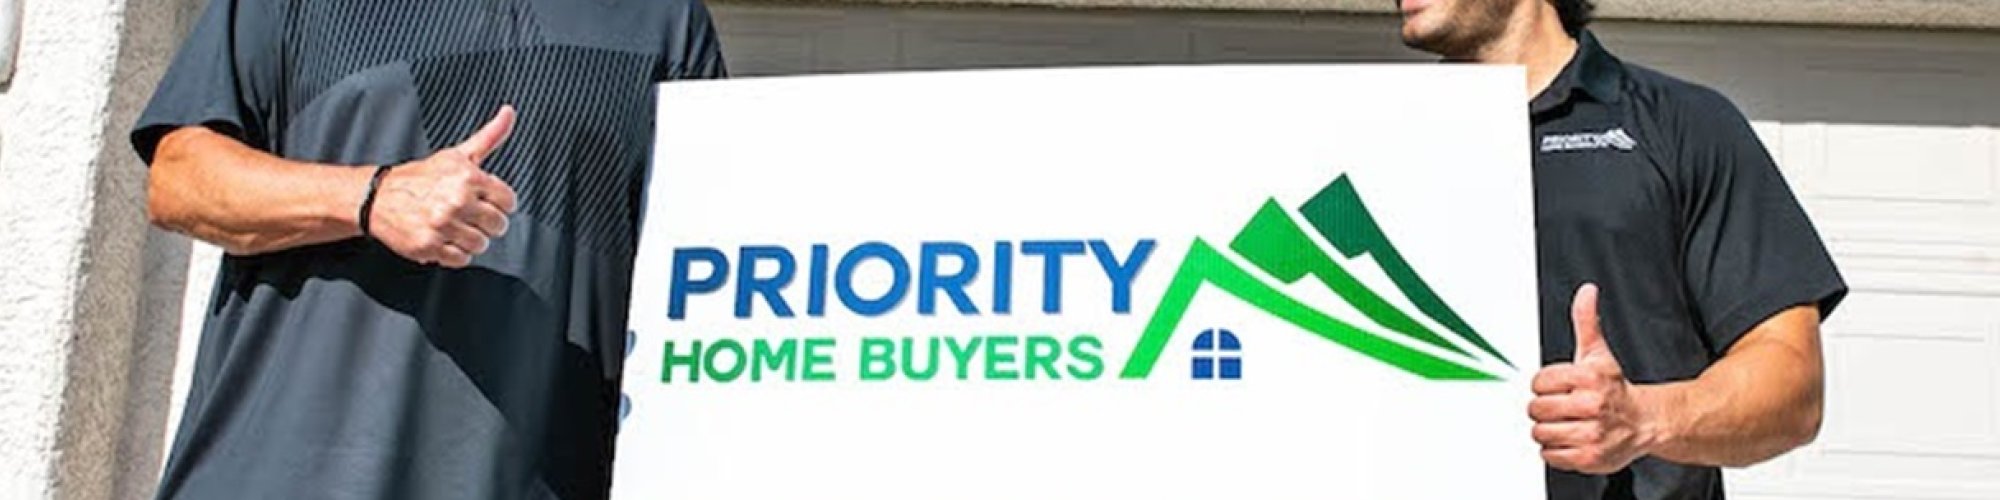 Priority Home Buyers | Sell My House Fast for Cash Phoenix